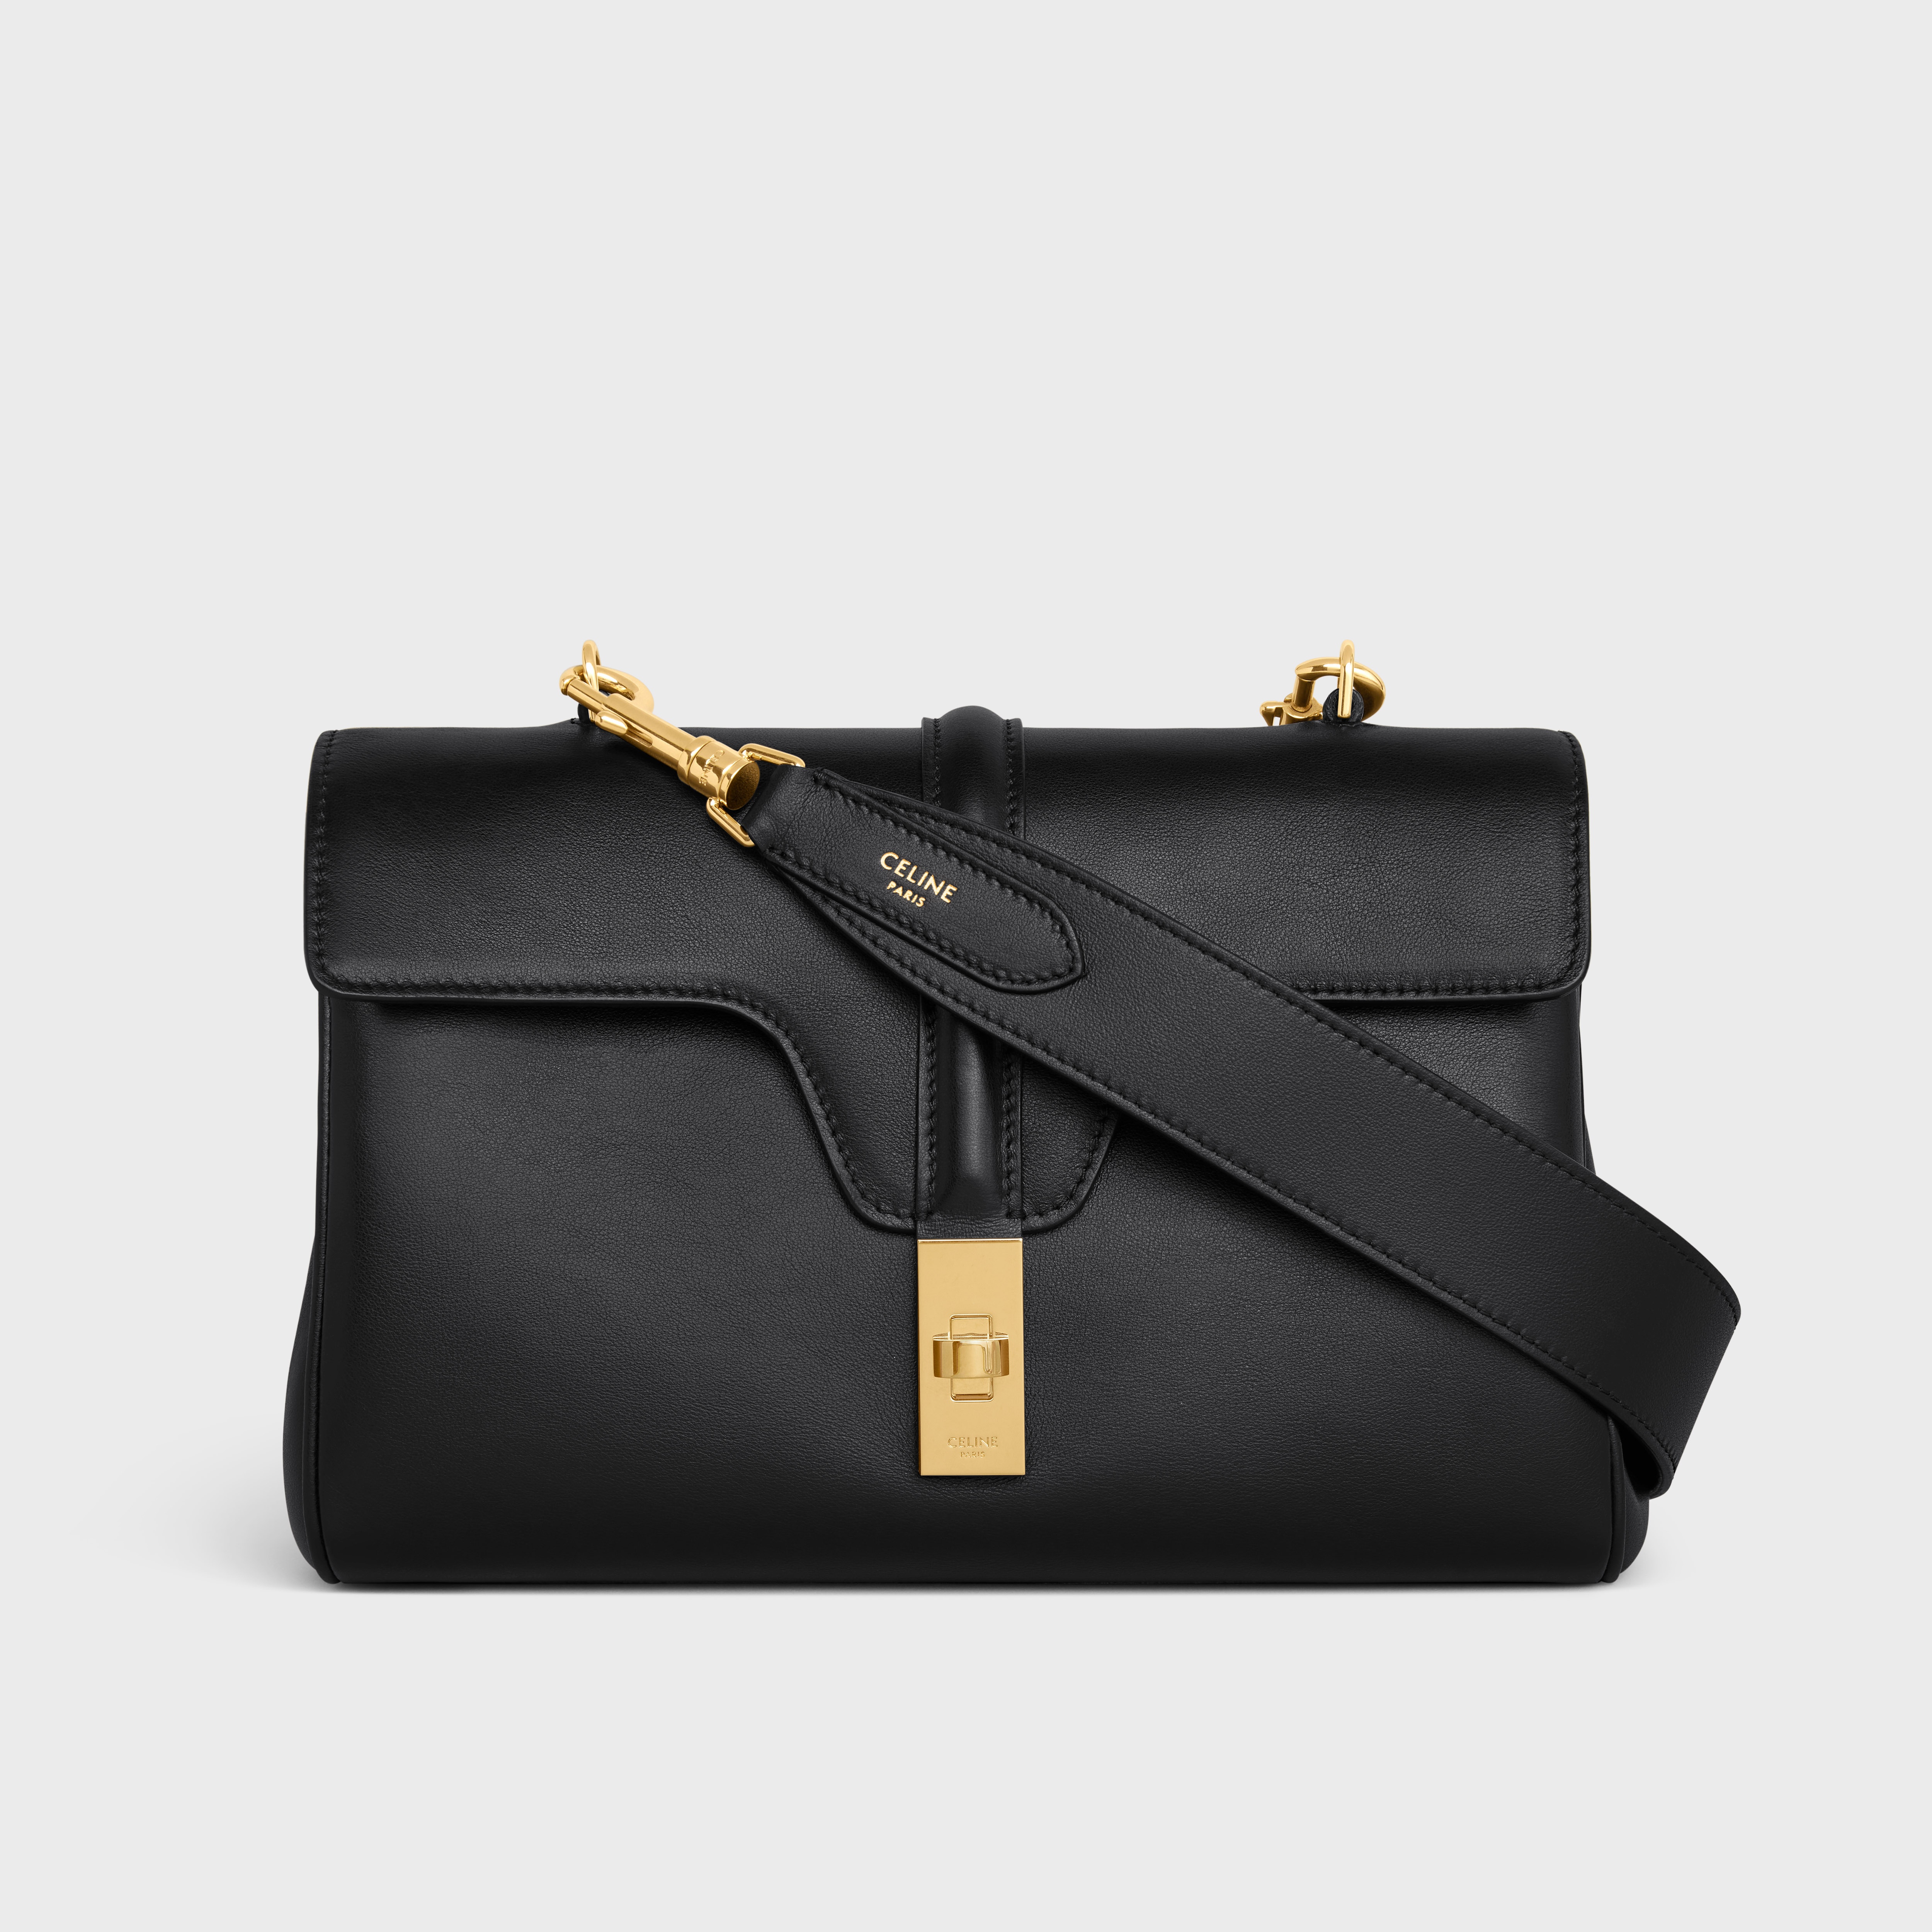 CELINE Long Strap in smooth calfskin with GOLD FINISHING | REVERSIBLE